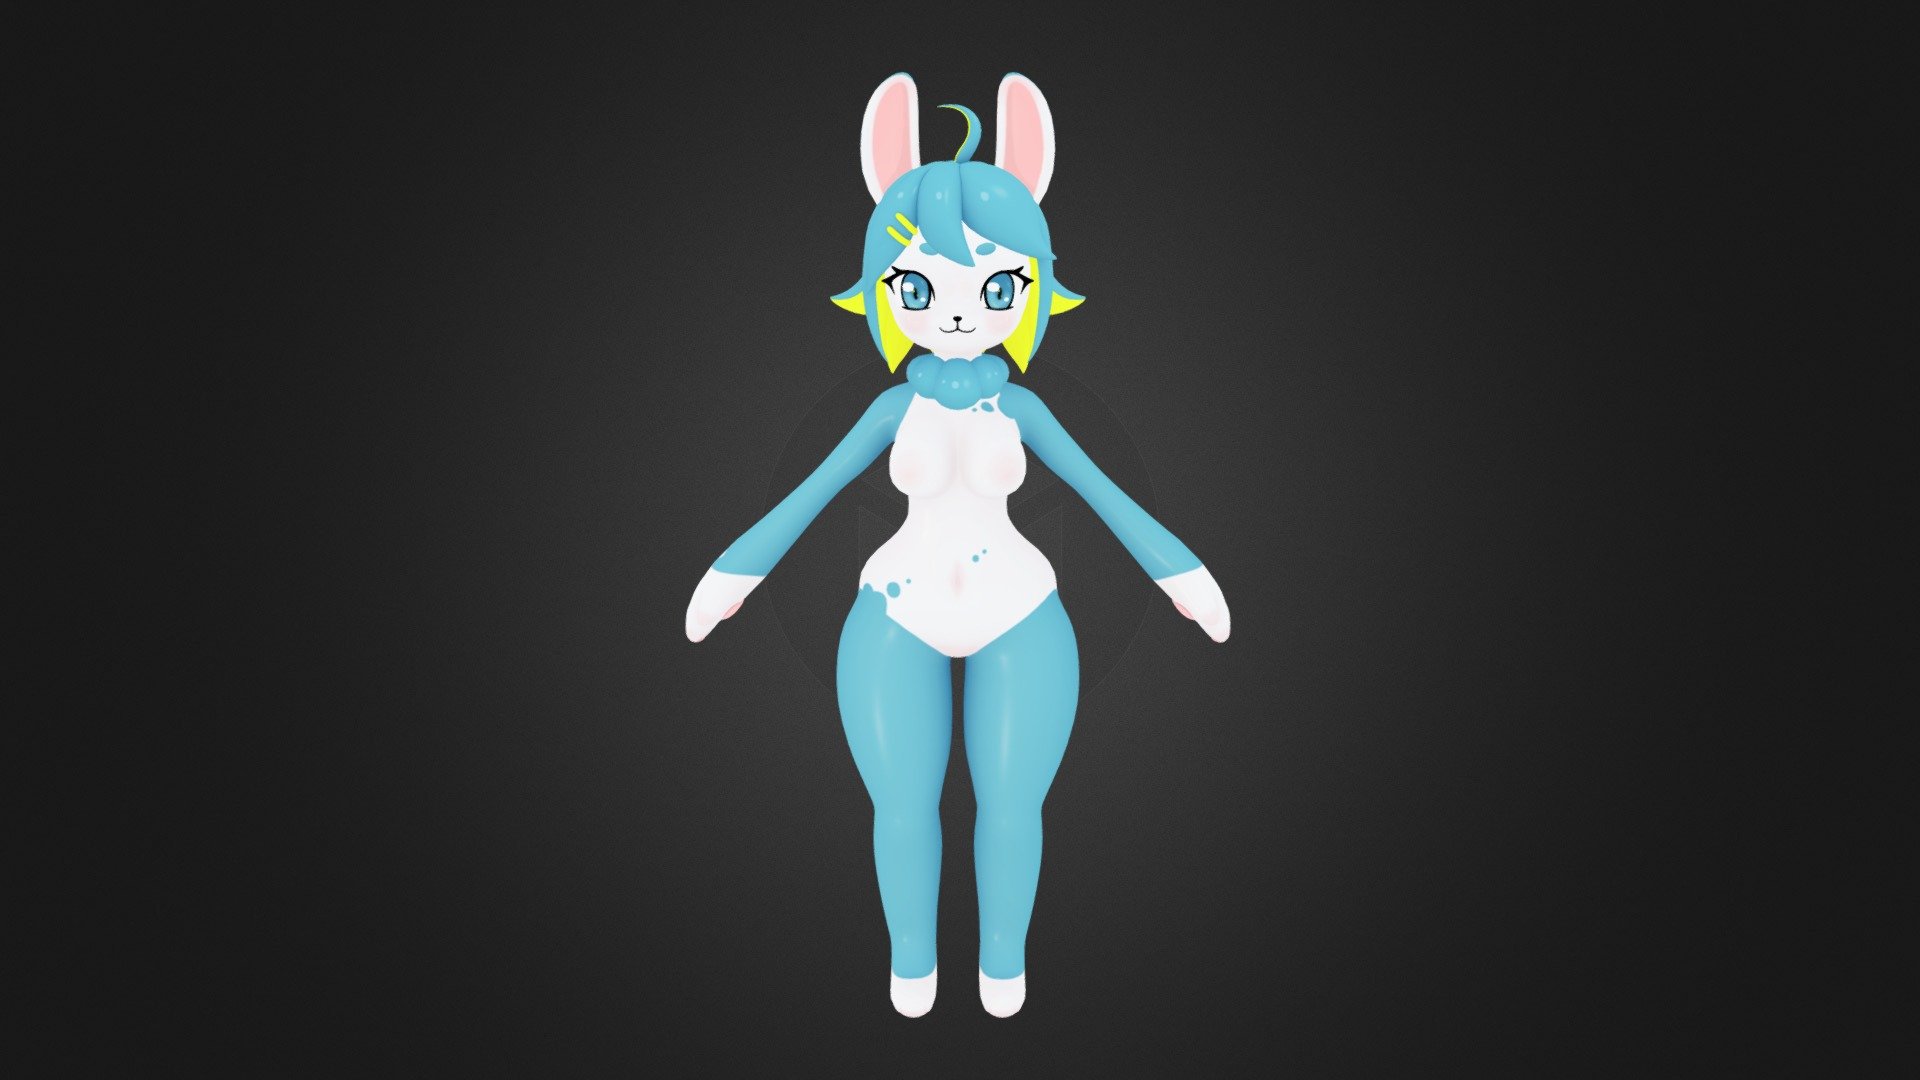 Original design by artist yugi086.
She made concept art of this character and I've brought it into 3D!

COMMISSIONS OPEN!
I am making models for VRChat and Vtubing! 
Feel free messaging me on Discord (FurryUslugi) / Telegram (@KIQKU) - Aqua Bunny VRChat Avatar - 3D model by Kioku FurryUslugi (@FurryUslugi) 3d model